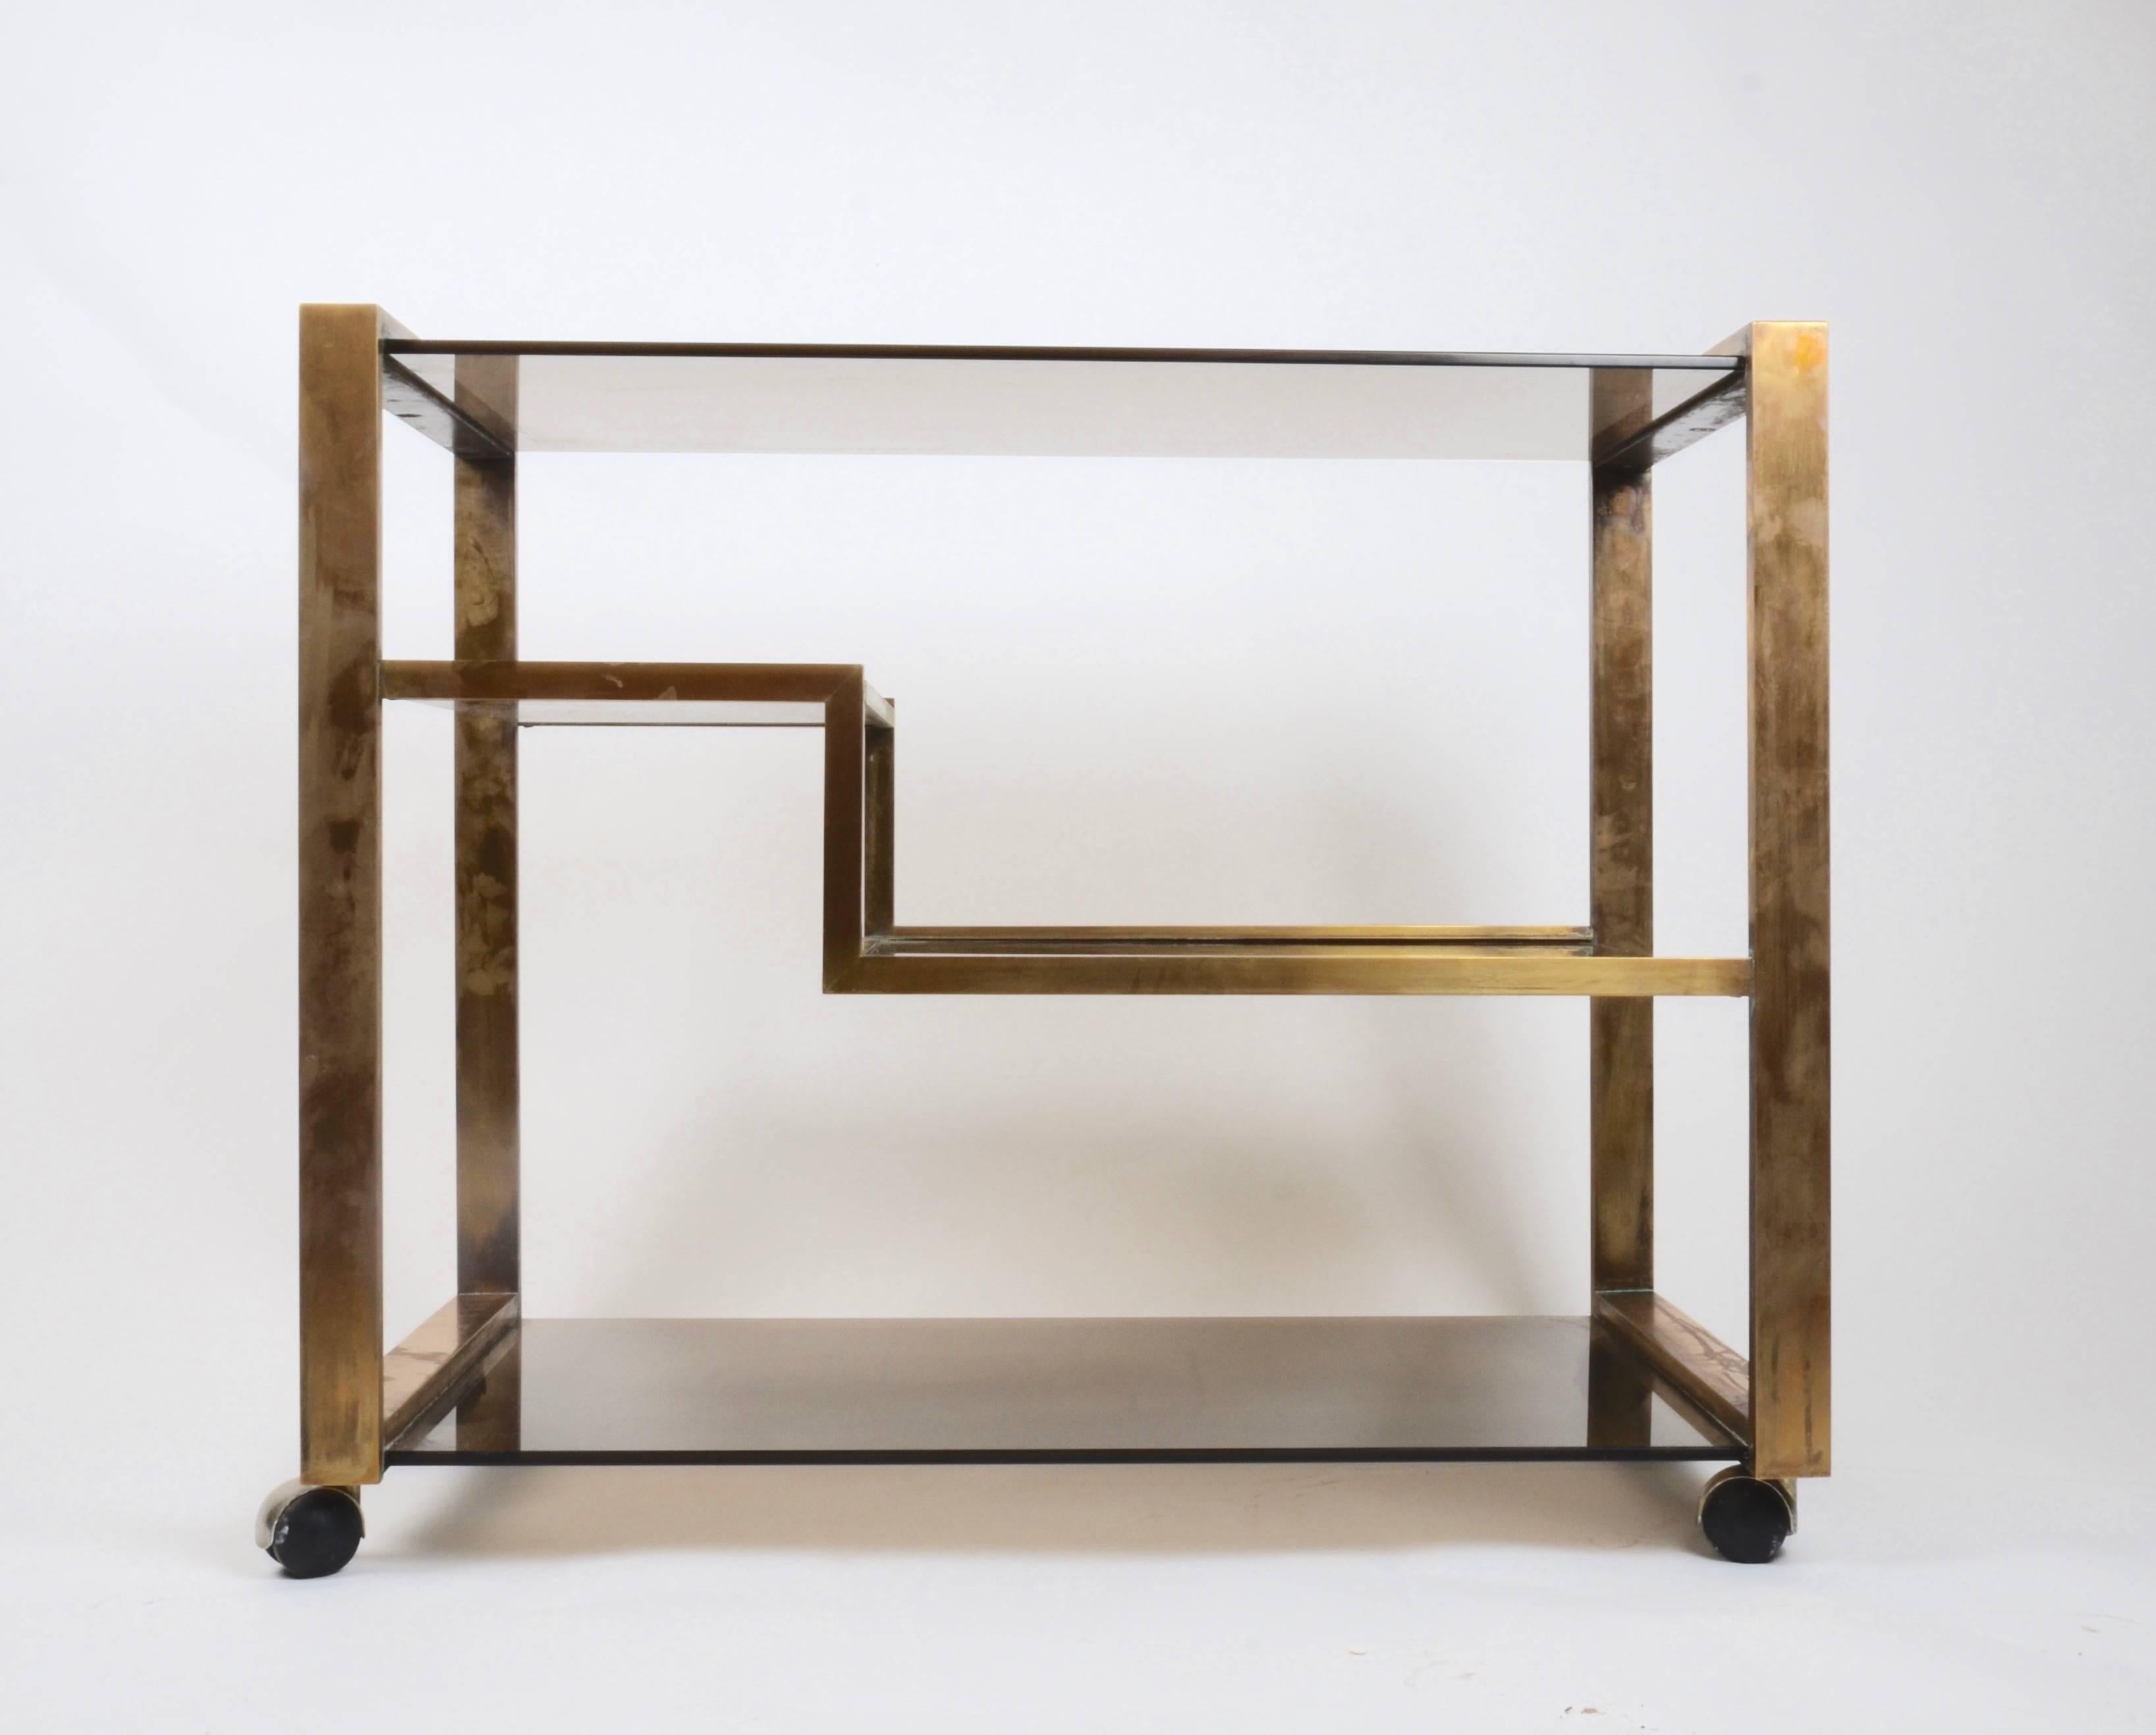 Italian bar cart in smoked glass and brass, designed by Gabriella Crespi. Italy, 1970s.